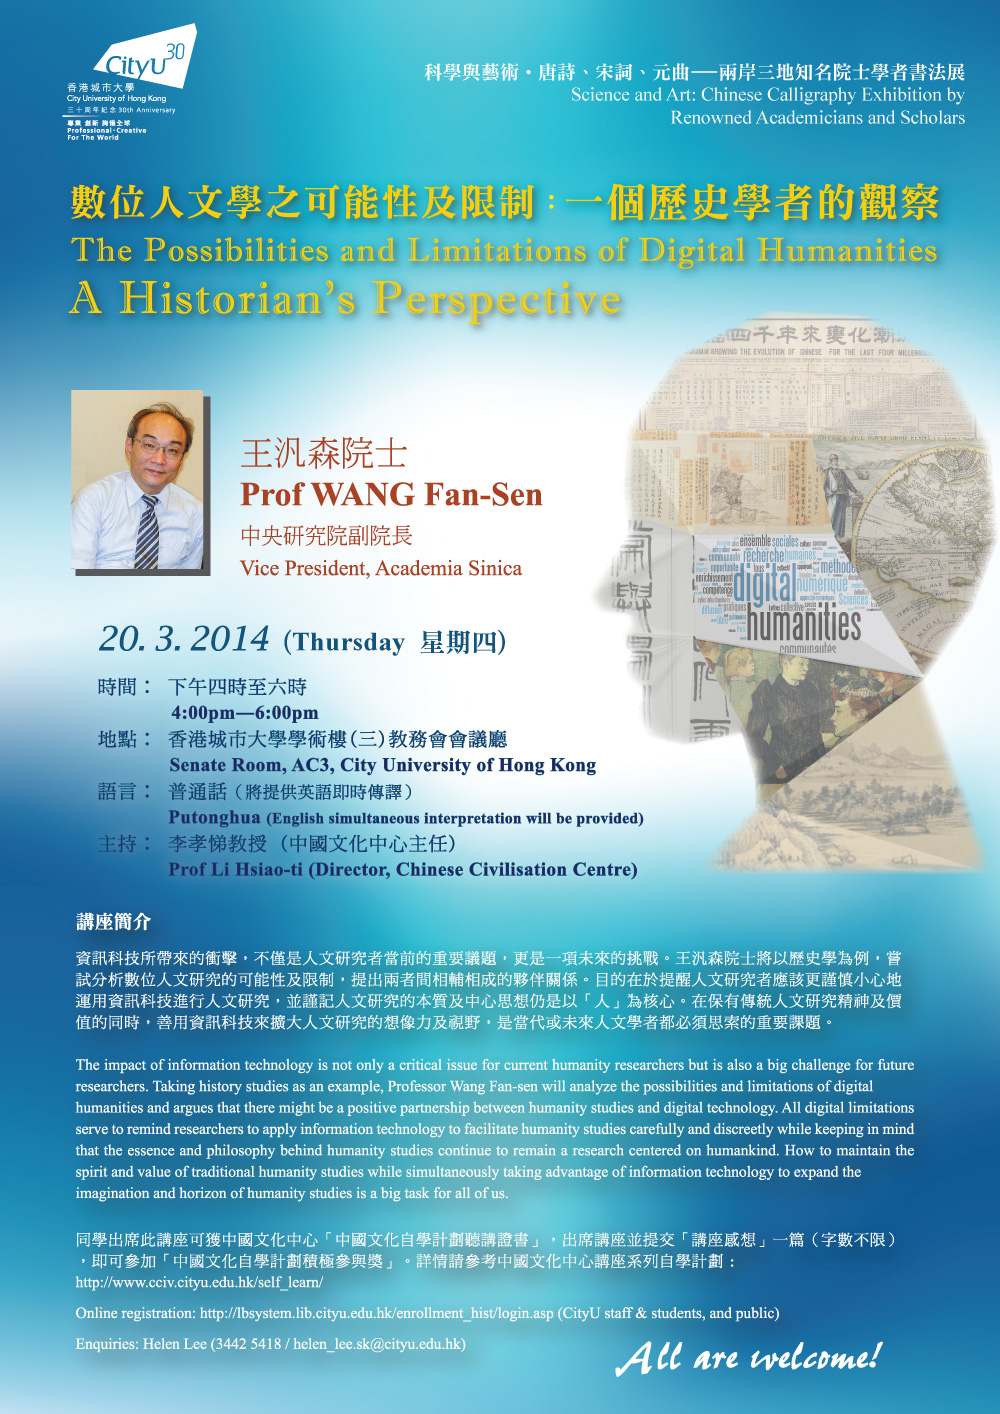 Science and Art: Chinese Calligraphy Exhibition by Renowned Academicians and Scholars: The Possibilities and Limitations of Digital Humanities: A Historian's Perspective 科學與藝術*唐詩、宋詞、元曲—兩岸三地知名院士學者書法展︰數位人文學之可能性及限制：一個歷史學者的觀察